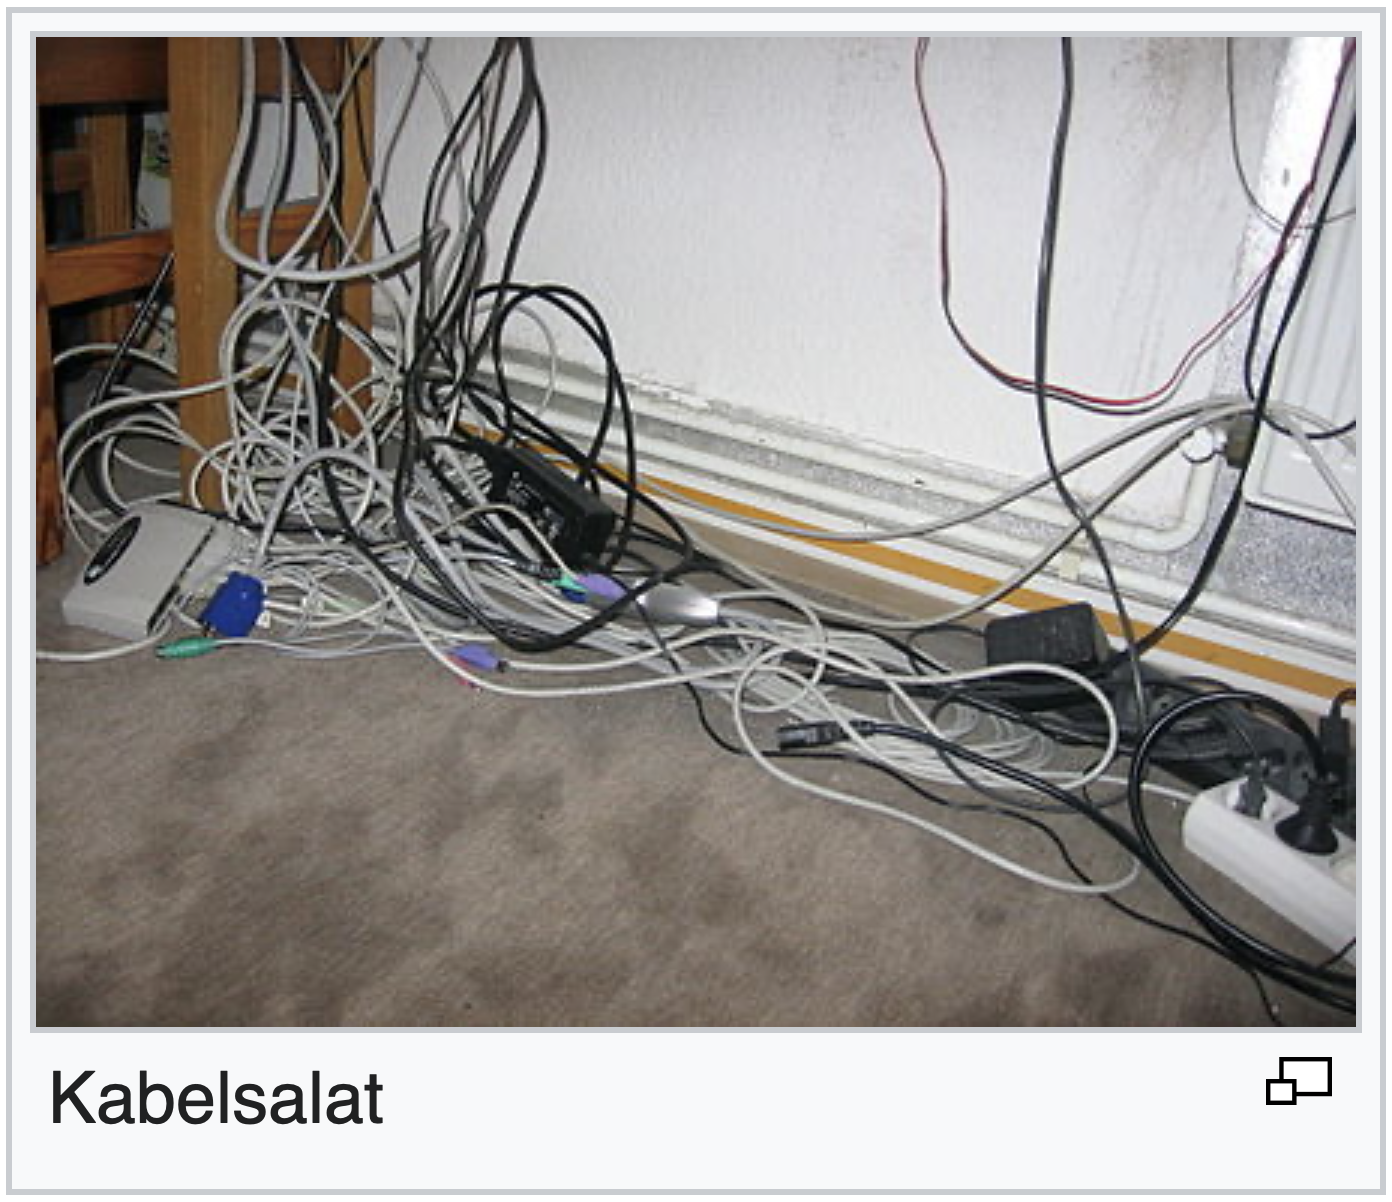 Screenshot showing a lot of unsorted cables, with a subtitle that says Kabelsalat.